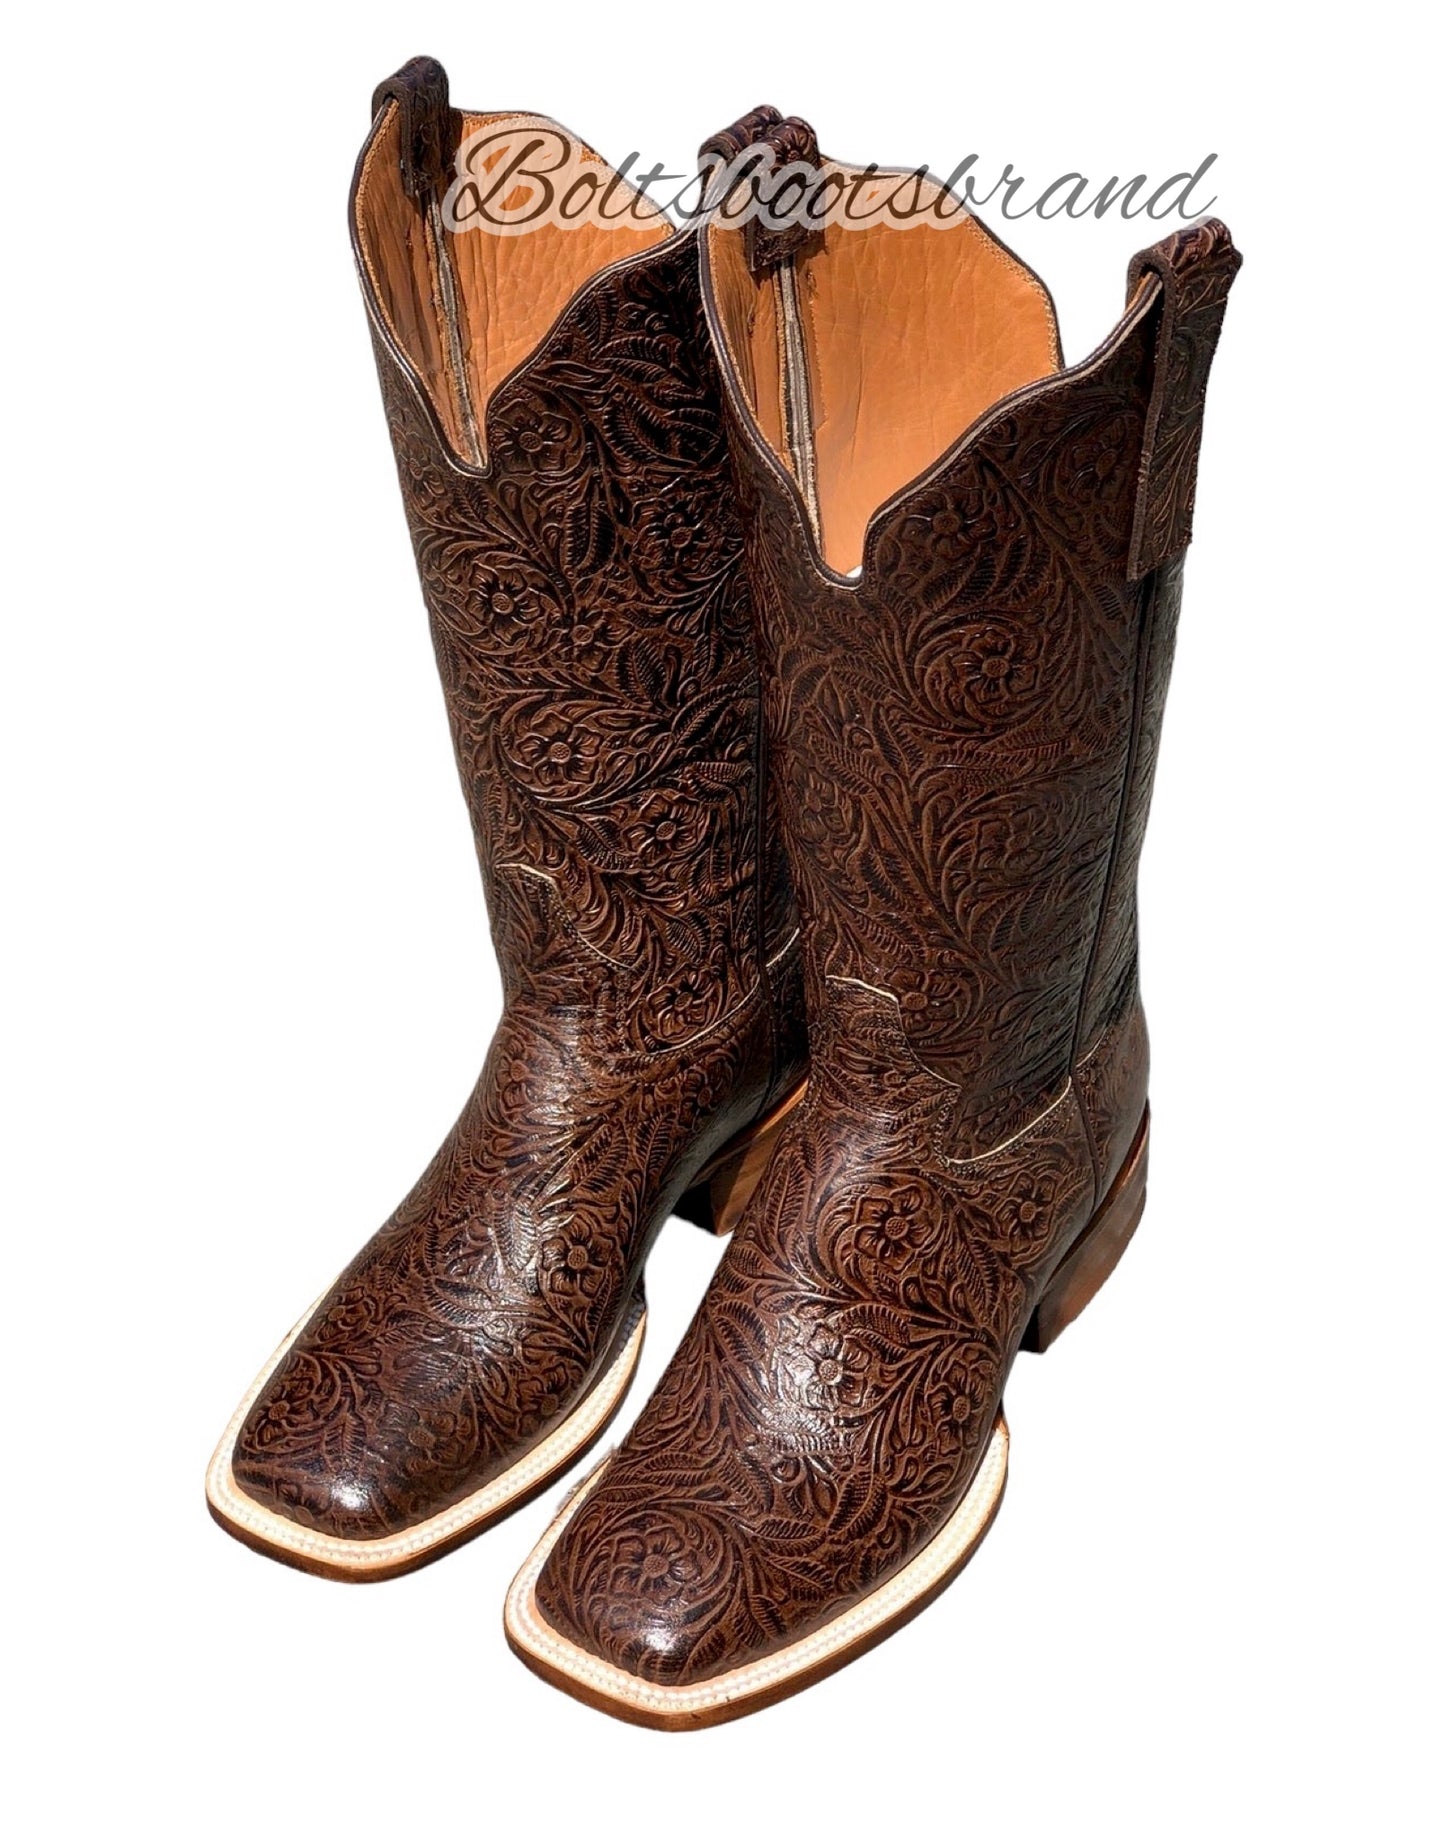 🧳Beautiful engraved leather boots